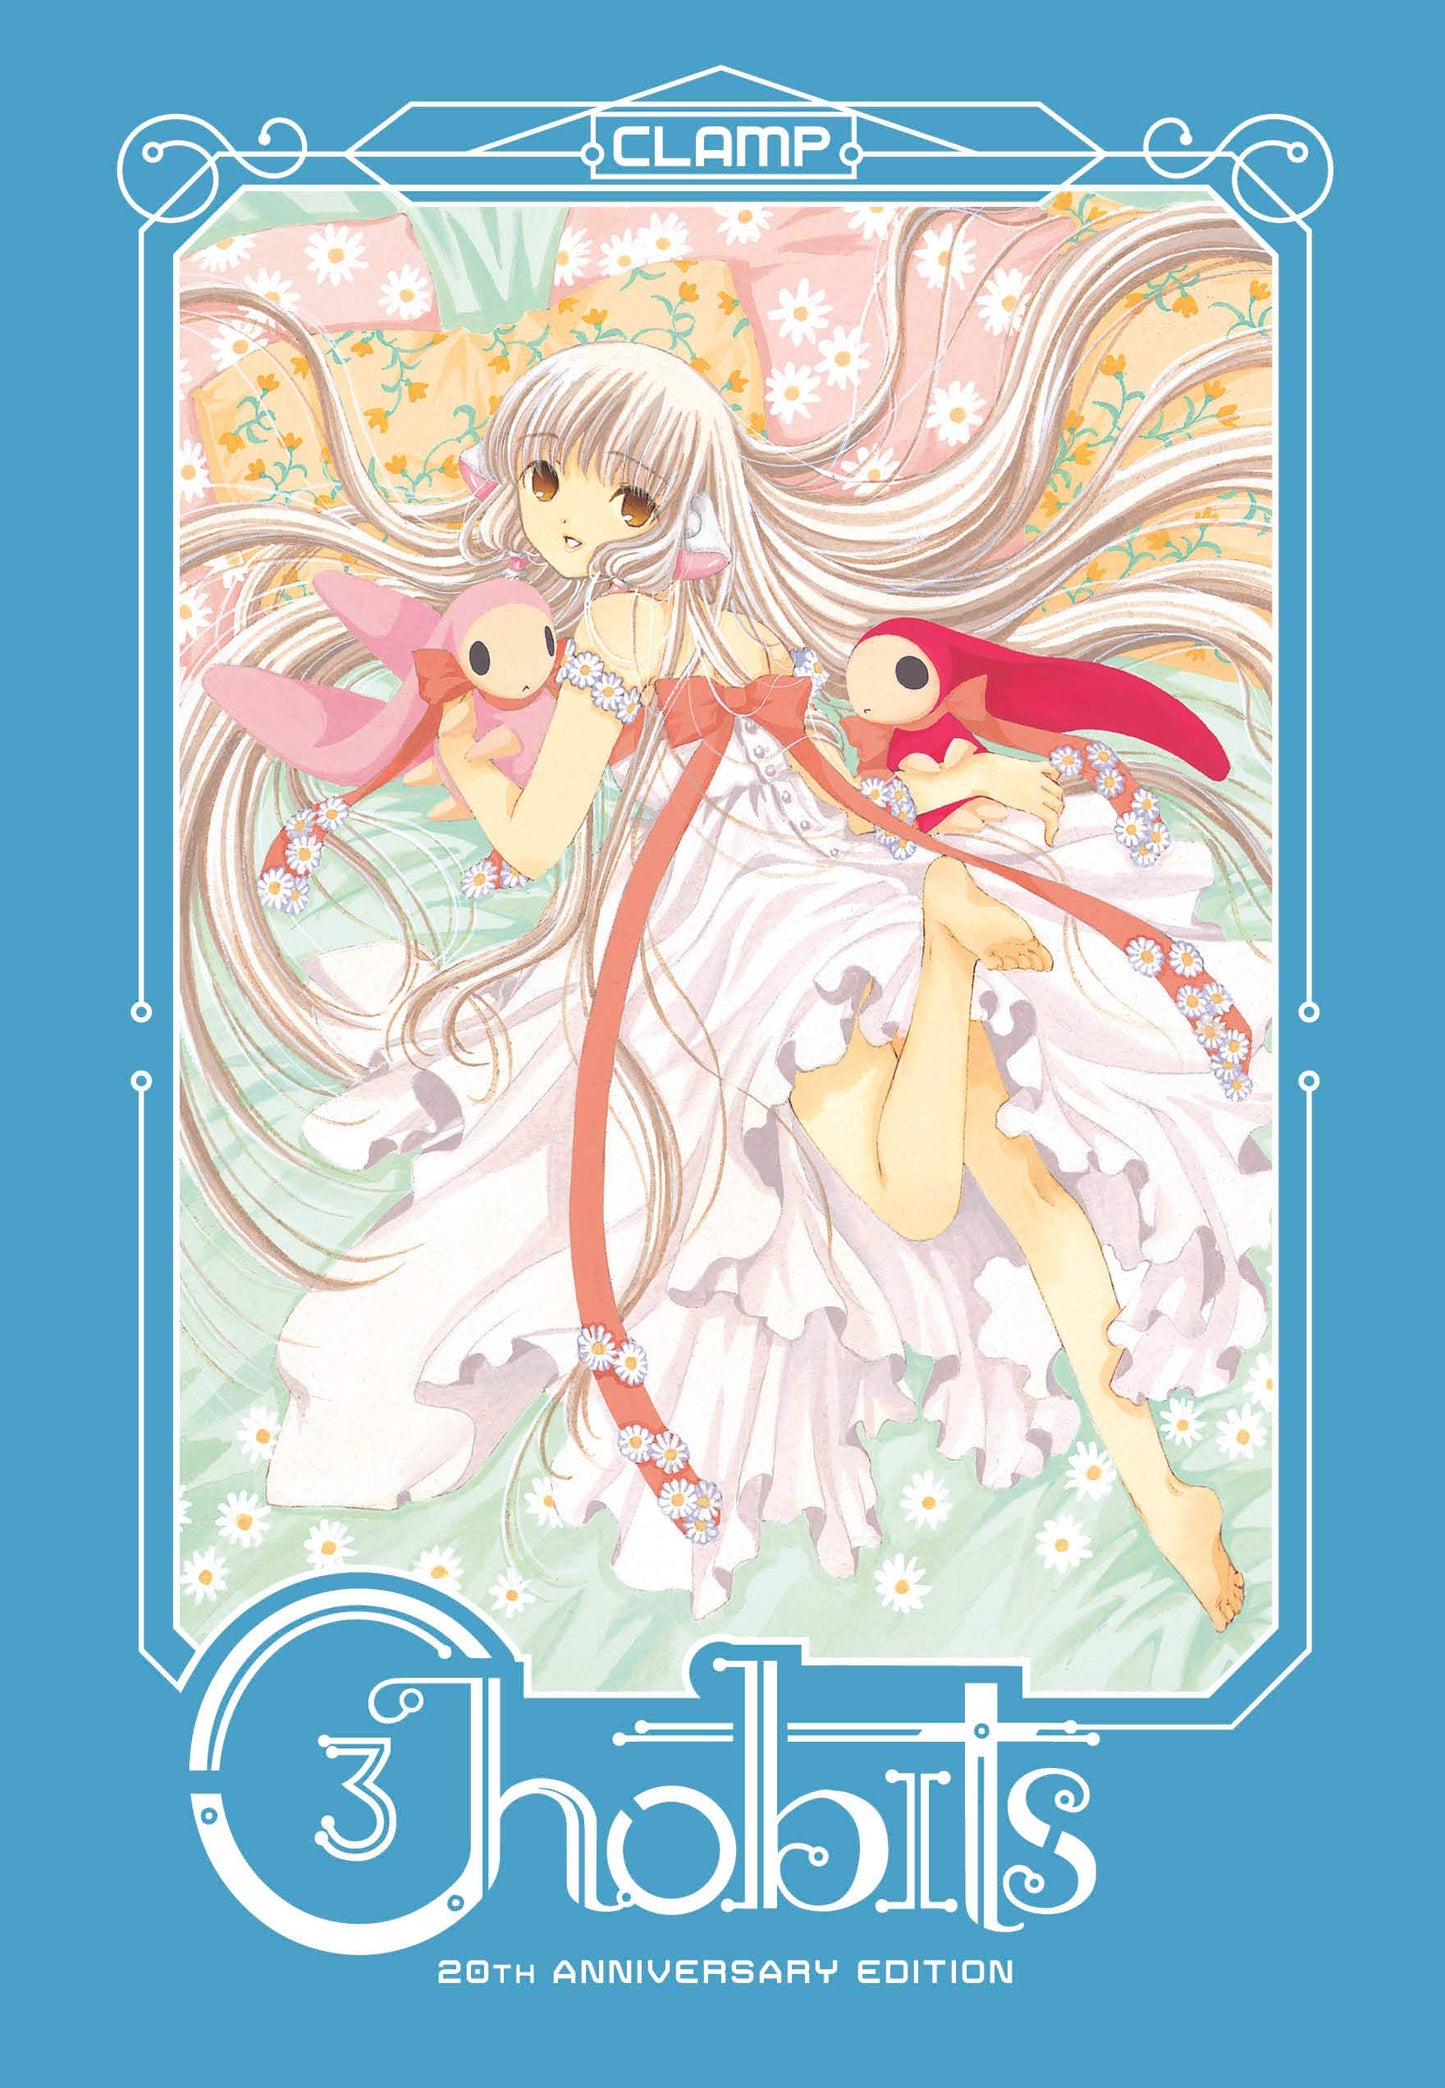 Chobits 20th Anniversary Edition 3 (Hardcover)